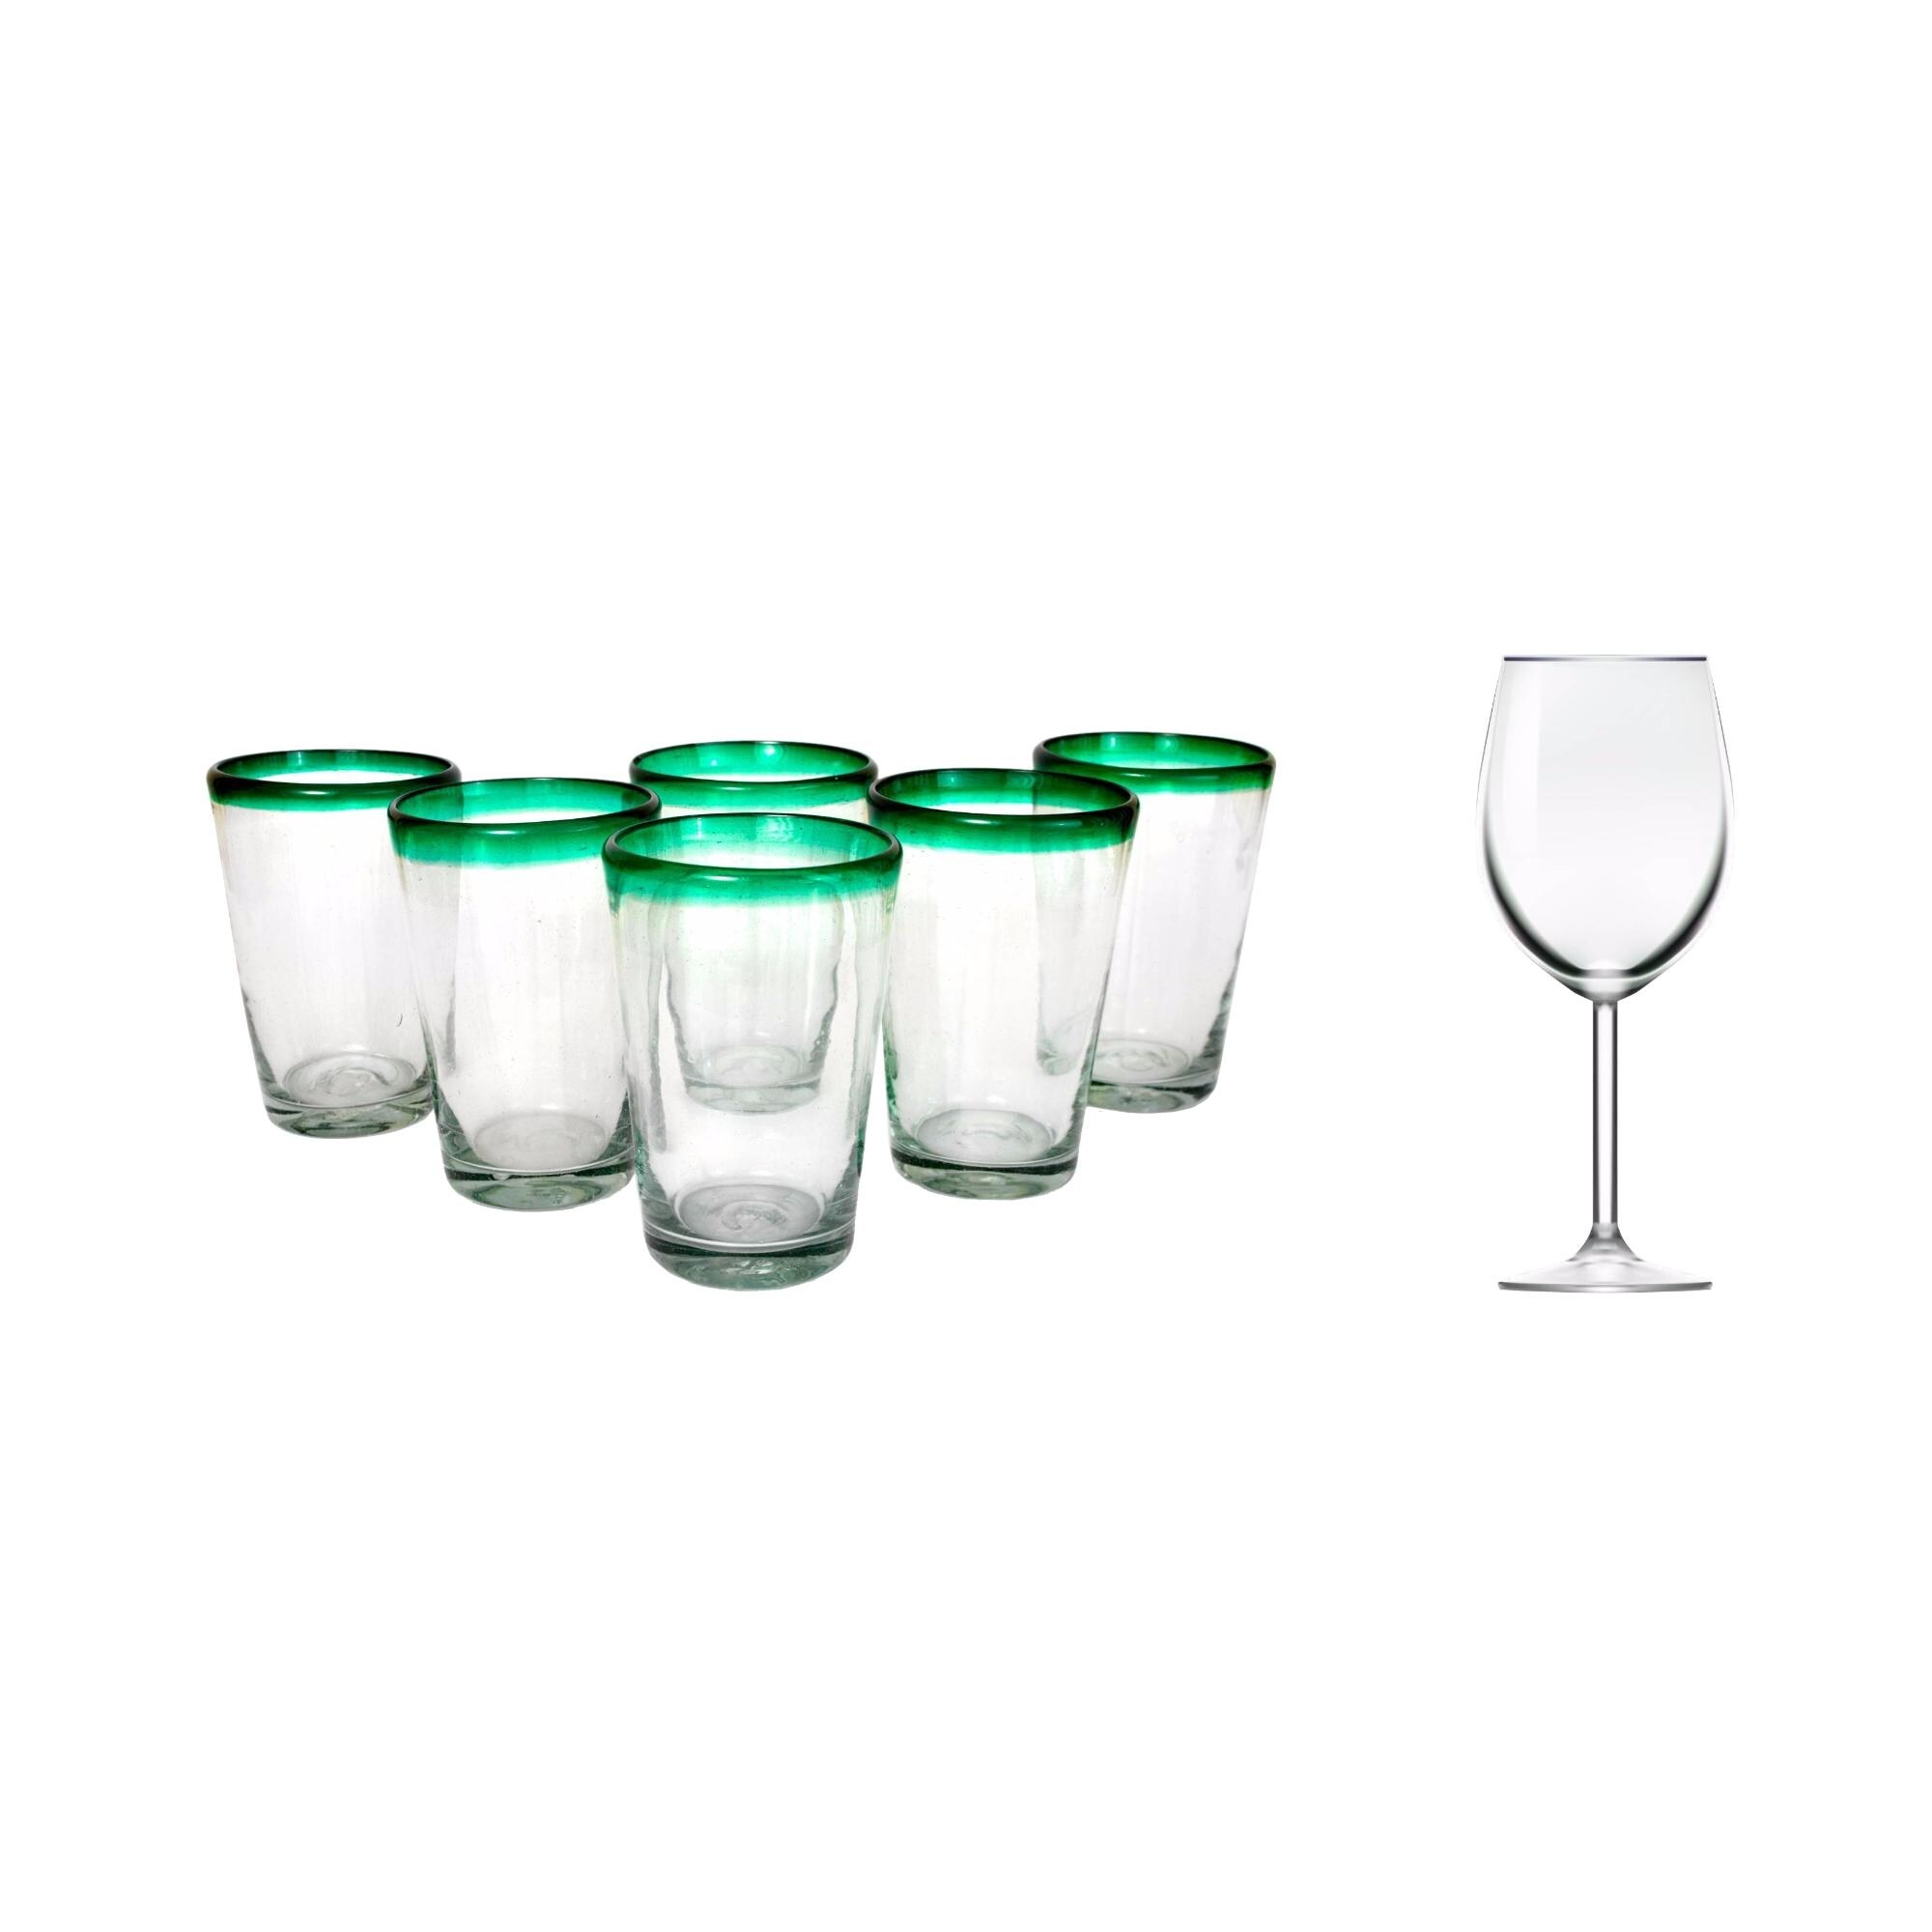 Simple Faceted Glass Tumbler - Clear - 6oz - The Foundry Home Goods